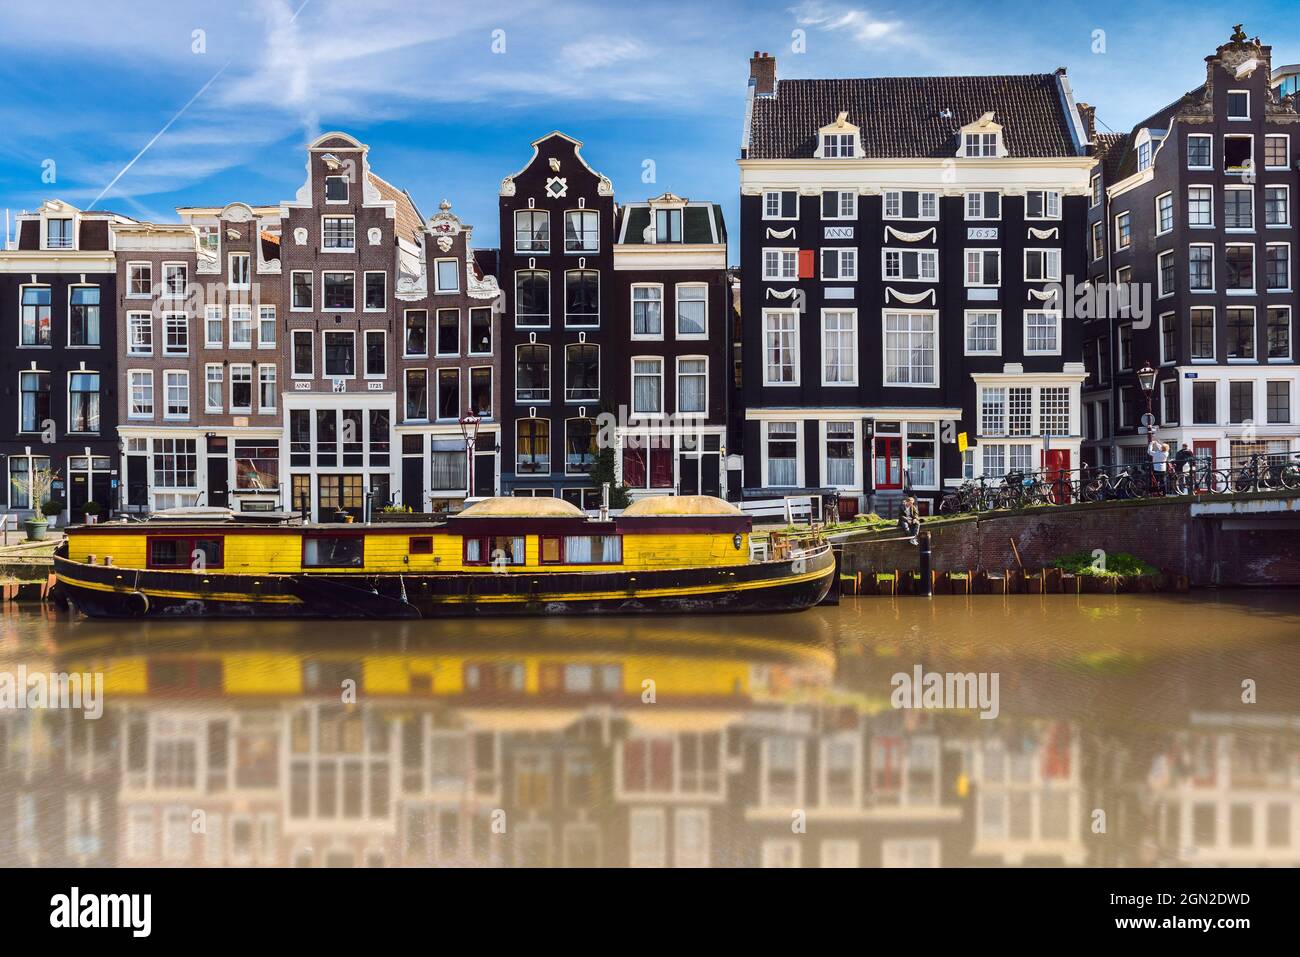 NETHERLANDS, AMSTERDAM, TYPICAL HOUSES ON THE EDGE OF THE CANAL WITH A YELLOW HOUSEBOAT IN THE FOREGROUND Stock Photo